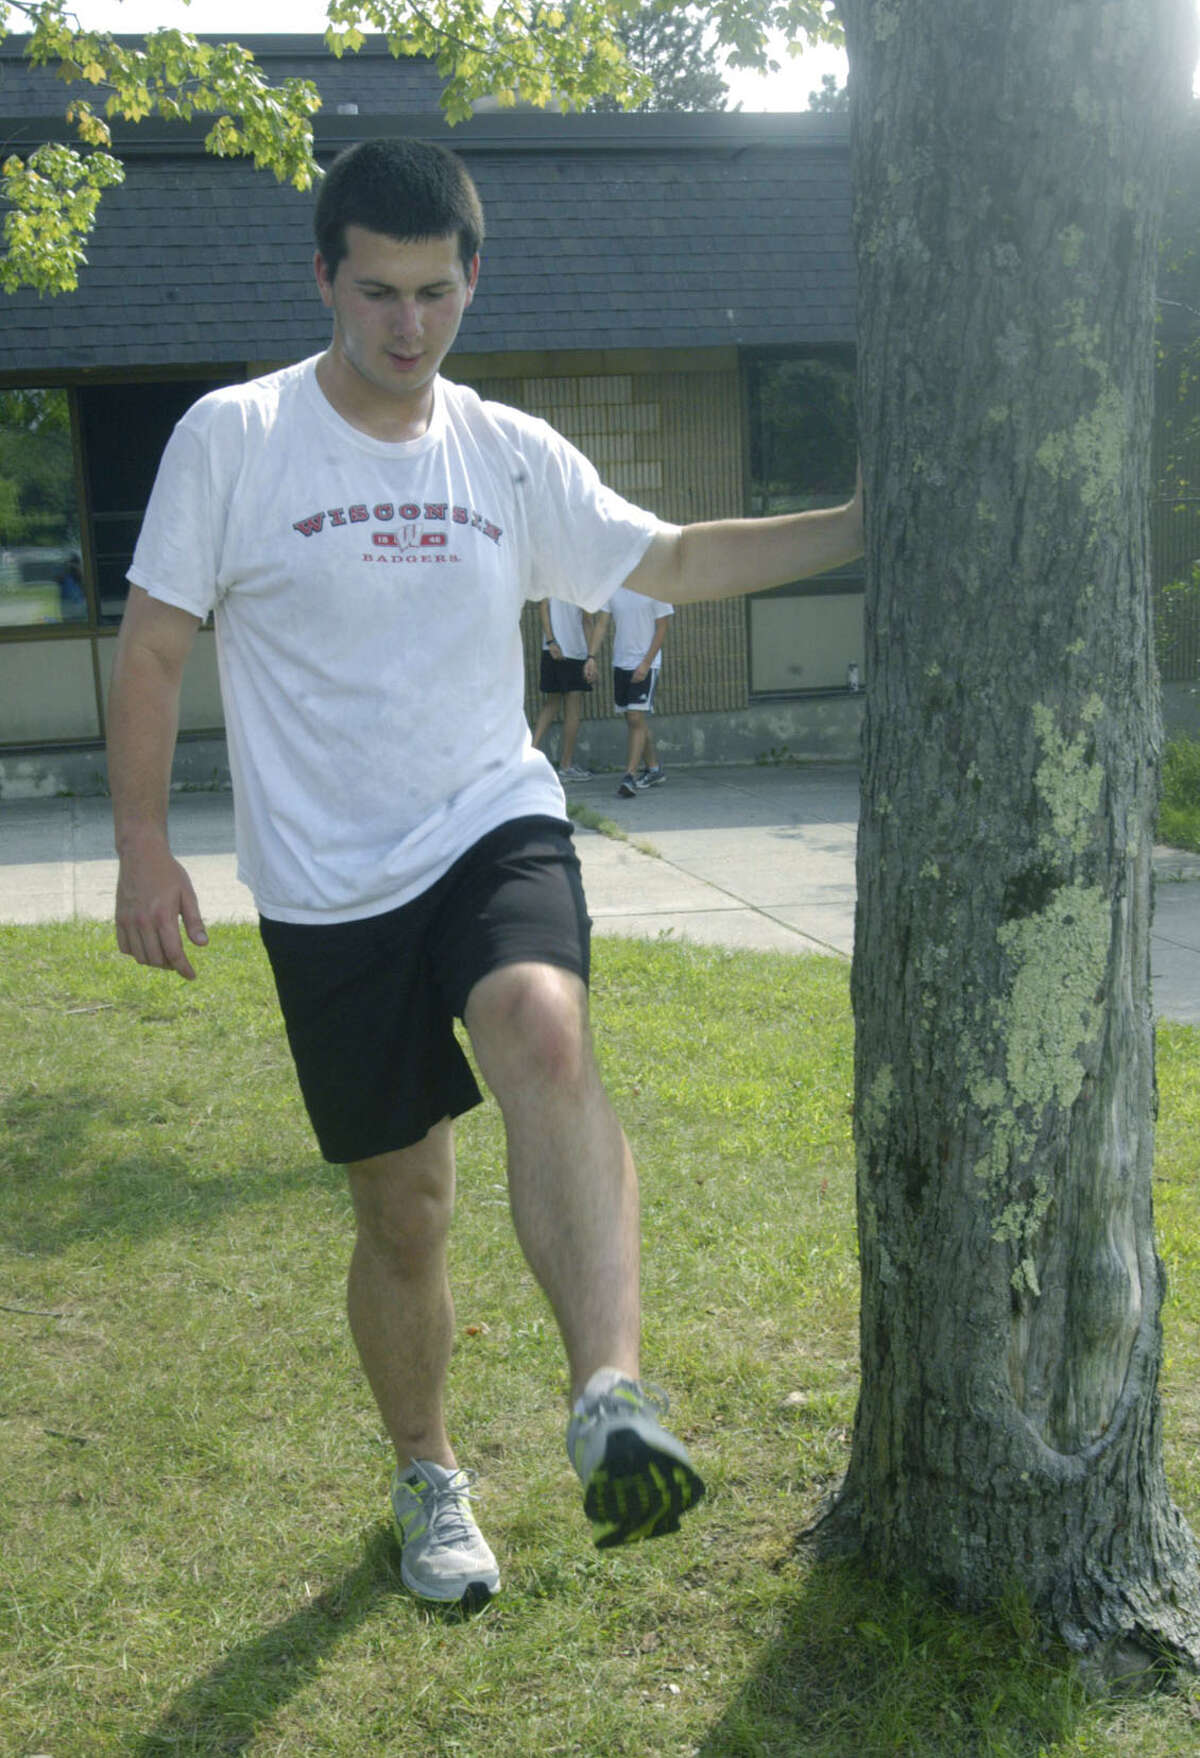 The Spartans' Ben Levine works out the kinks in preparation for a pre-season workout for Shepaug Valley High School boys' cross country. September 2012